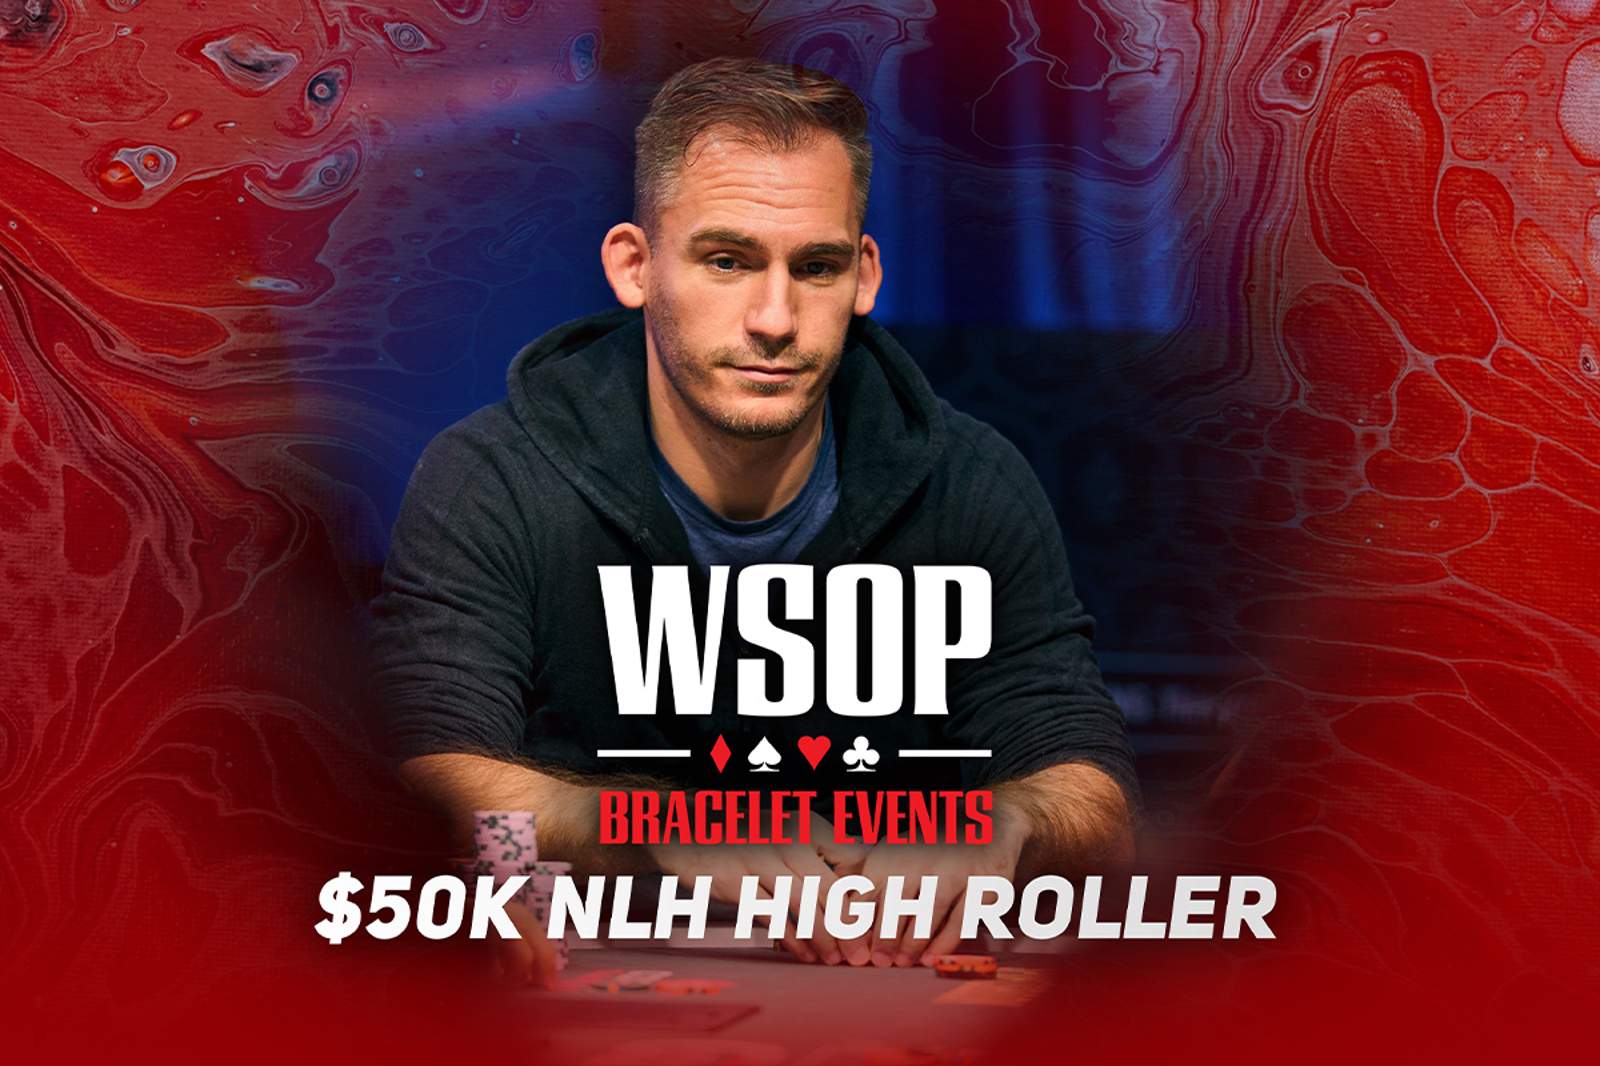 Watch the WSOP Event #38: $50K High Roller Final Table on PokerGO.com at 8 p.m. ET